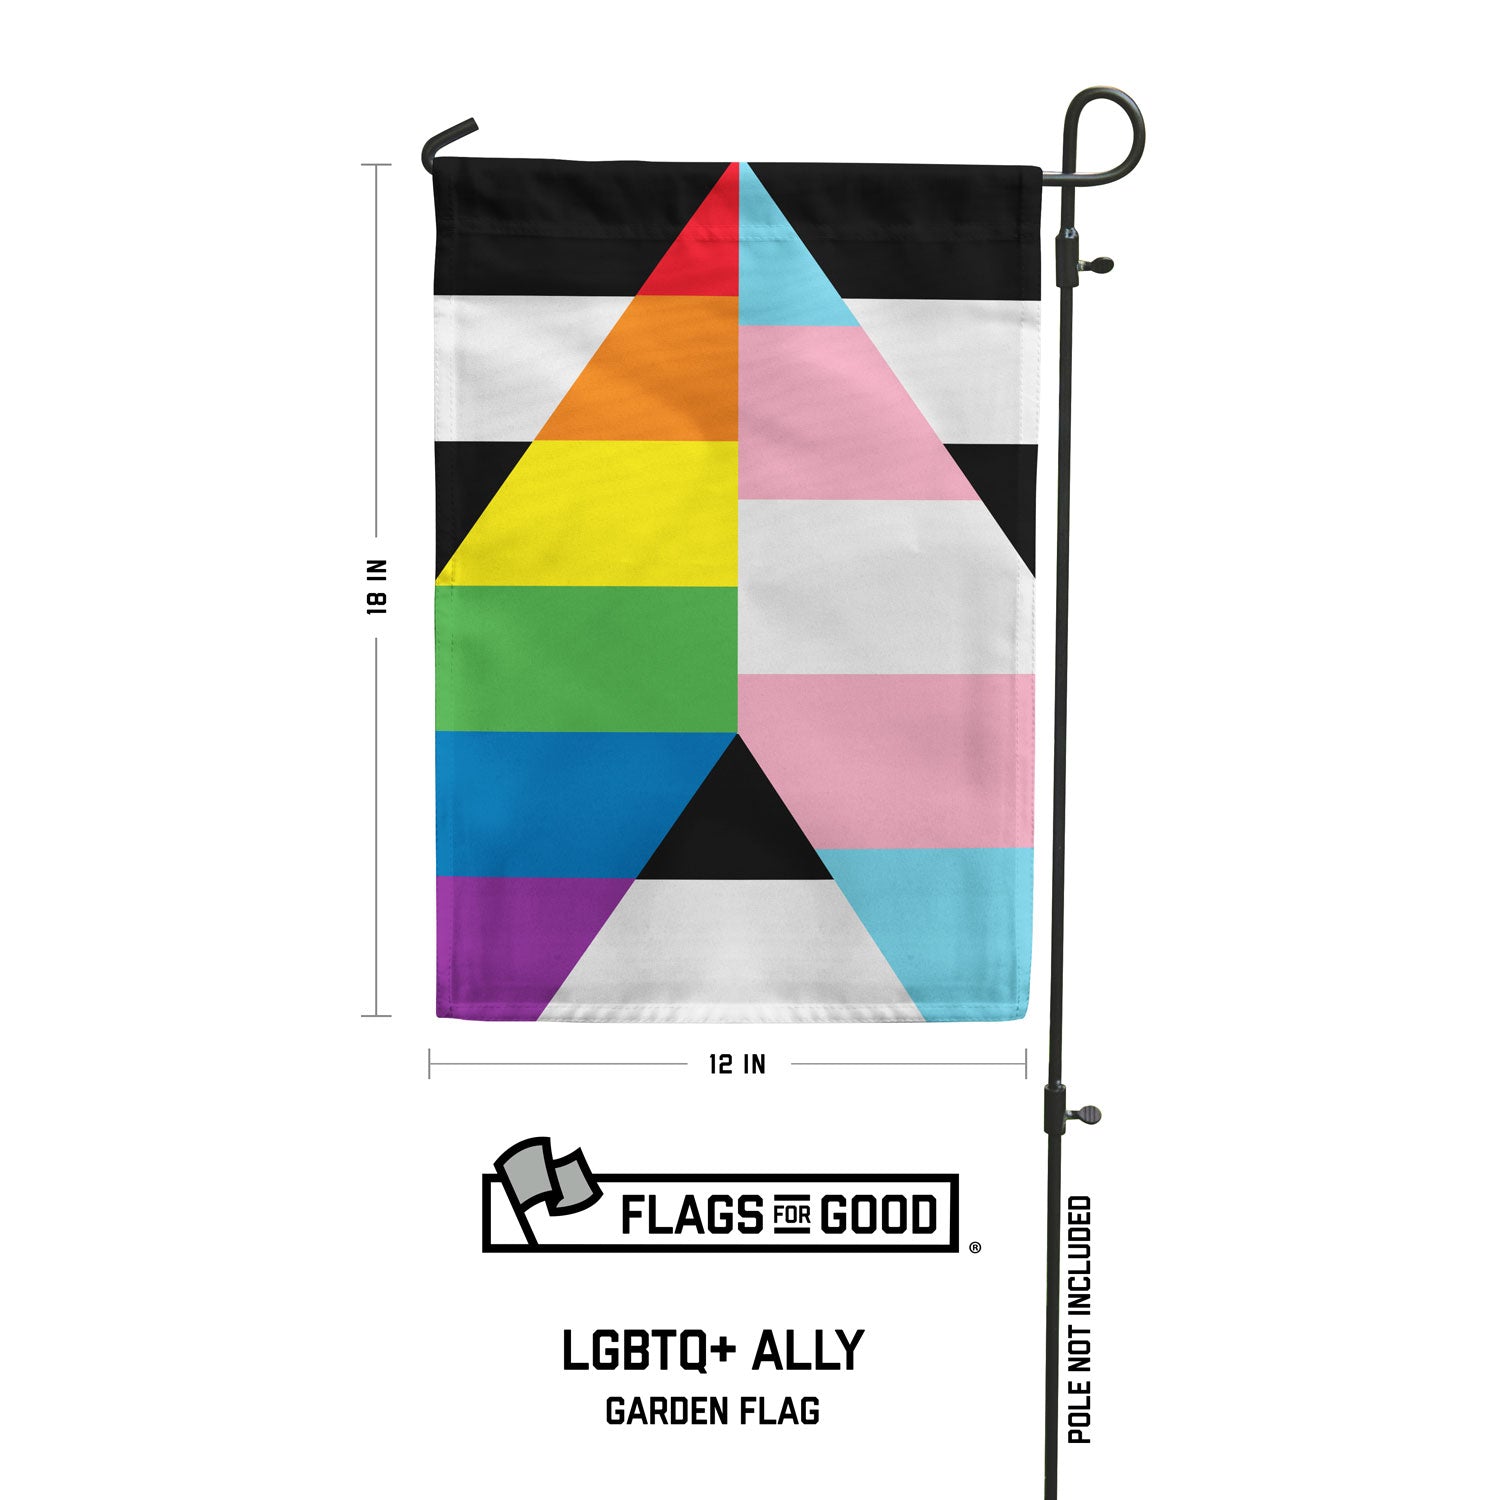 Flags for Good Ally Garden Flag with Trans Stripes measurements 12 inches by 18 inches